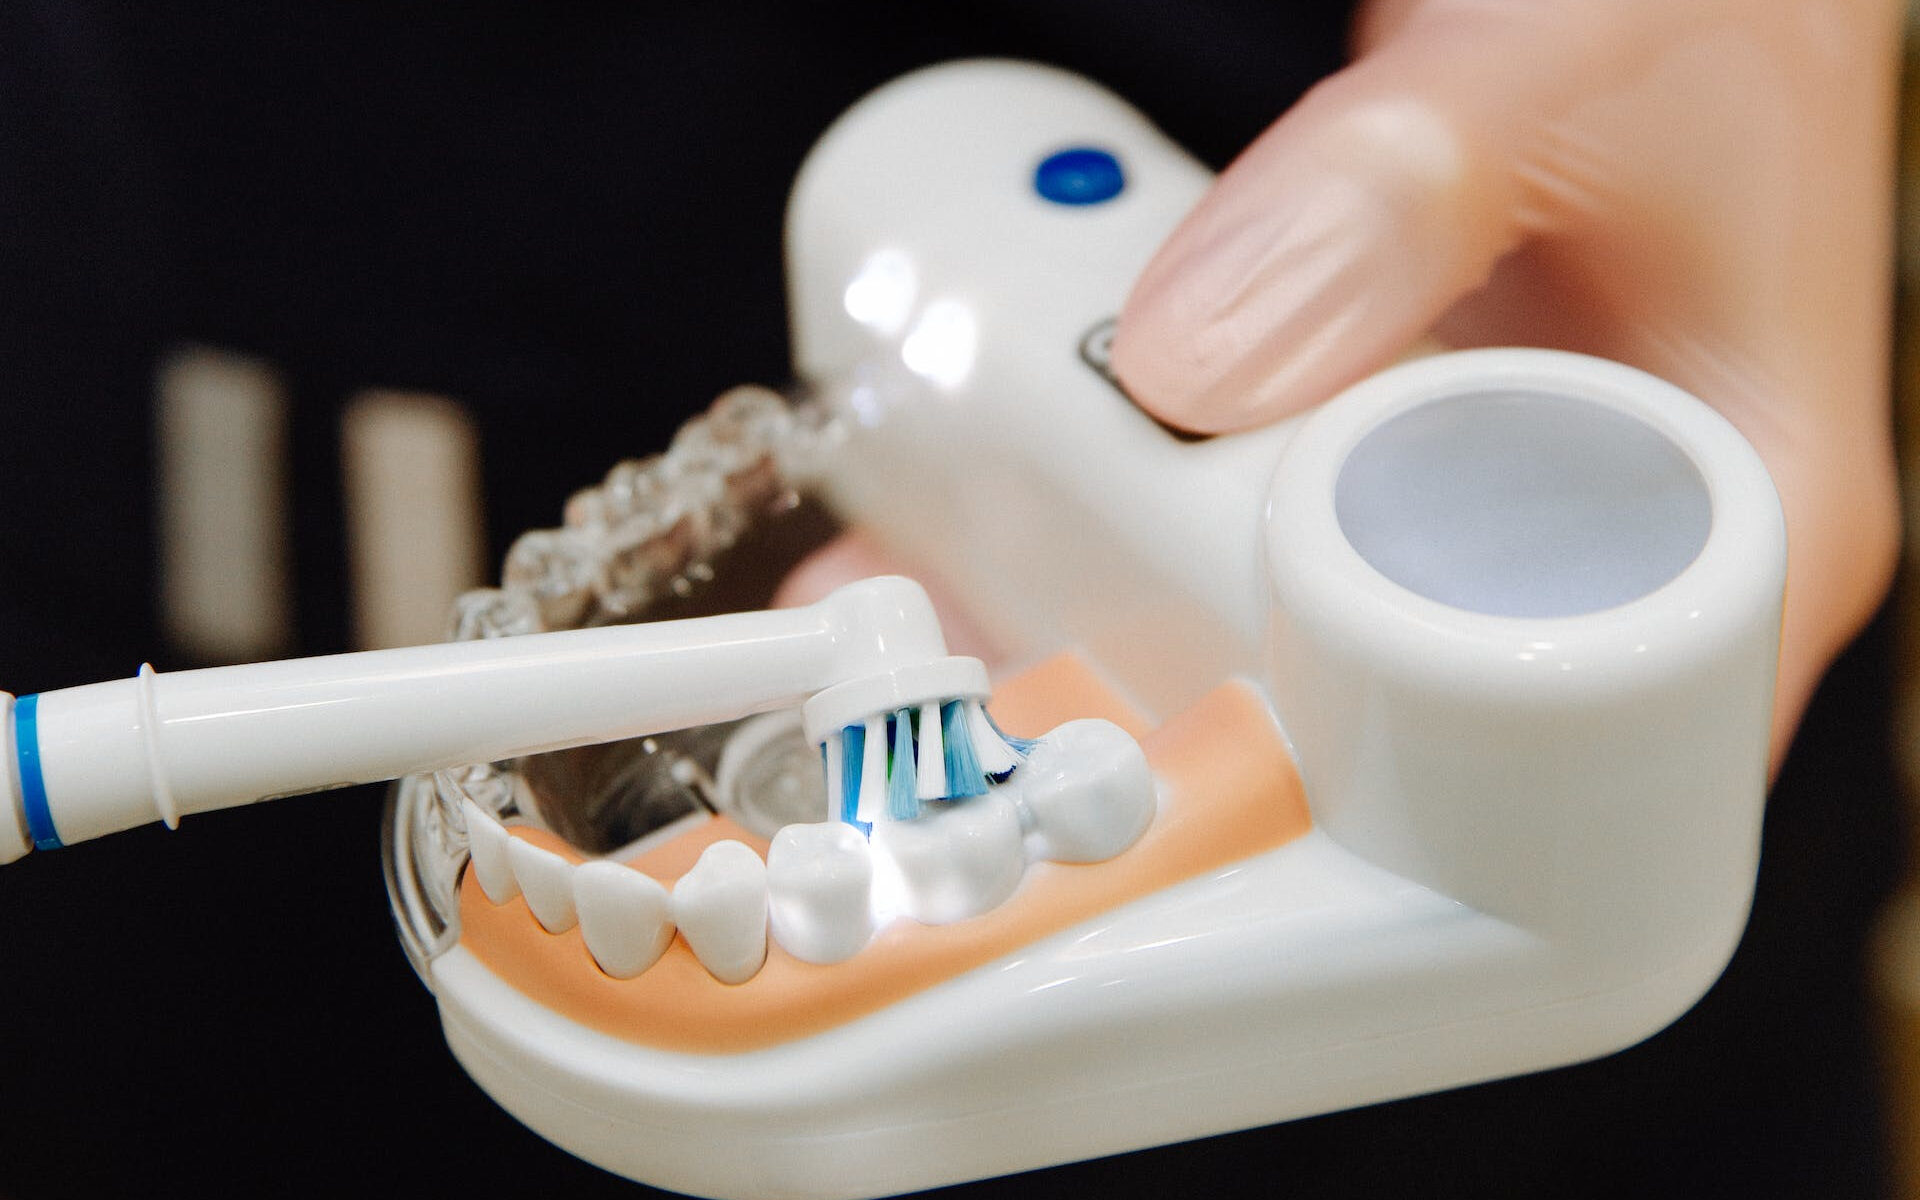 What Difference Does an Electric Toothbrush Make to a Child’s Dental Health?